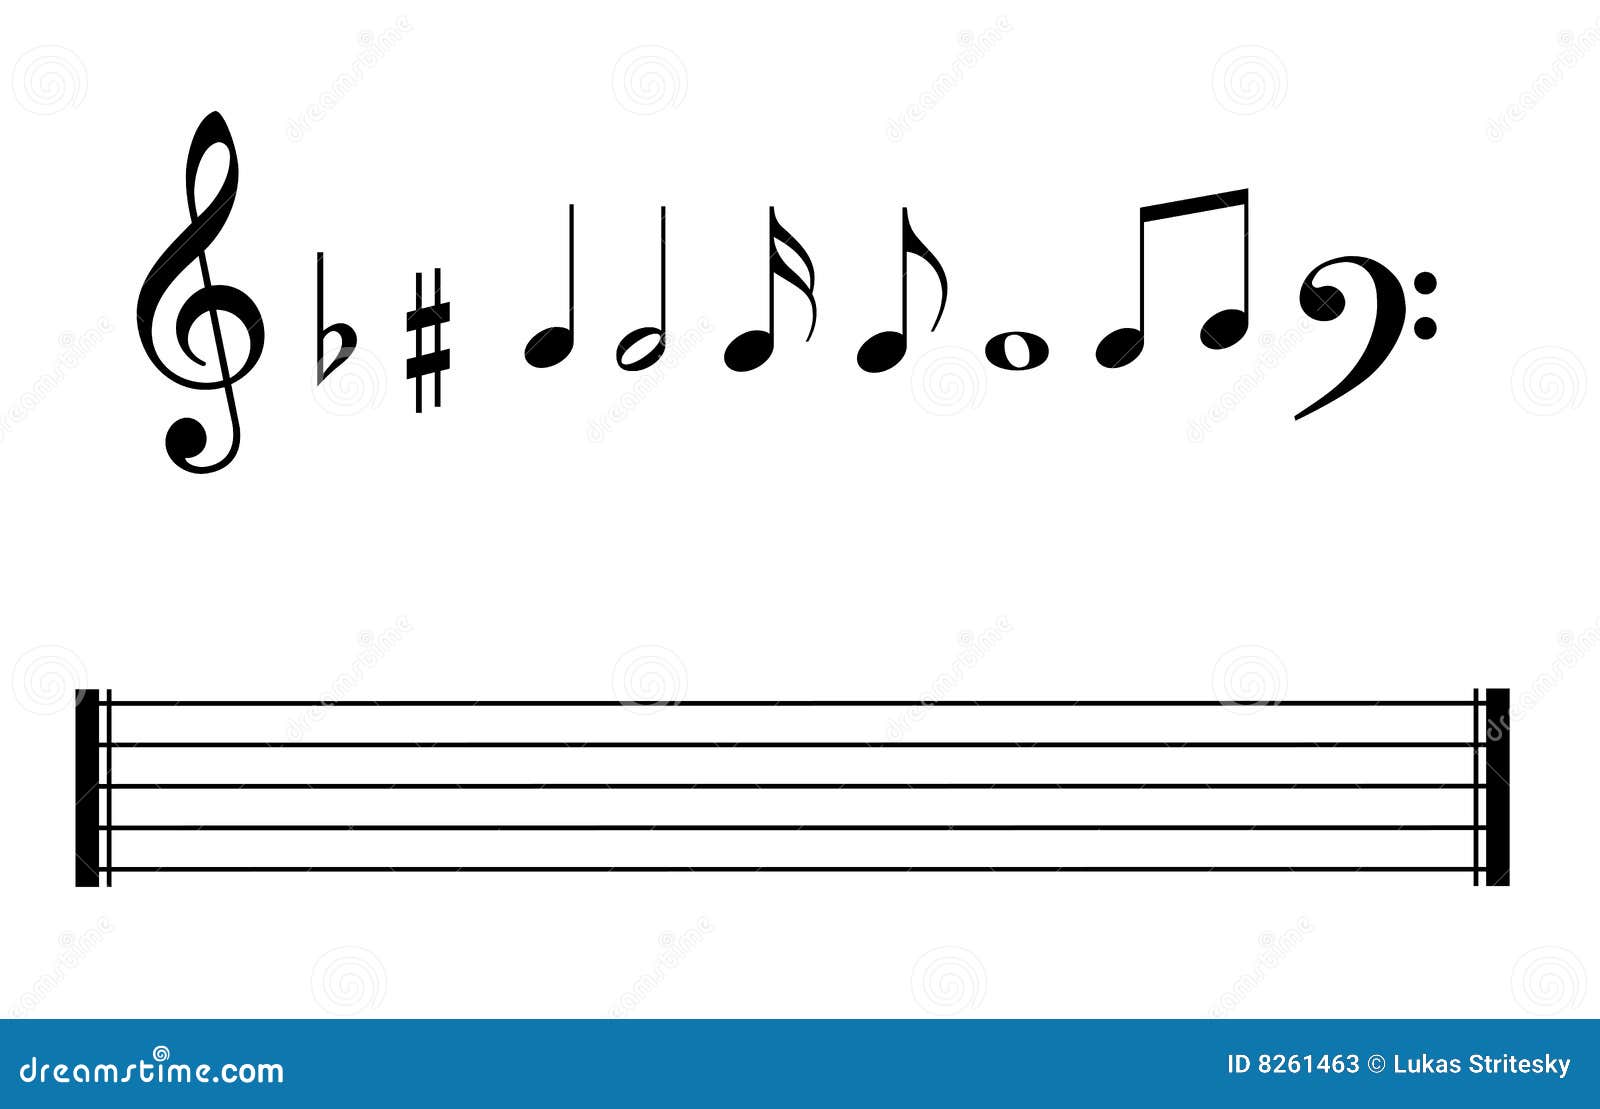 music notes s set, staves and note lines